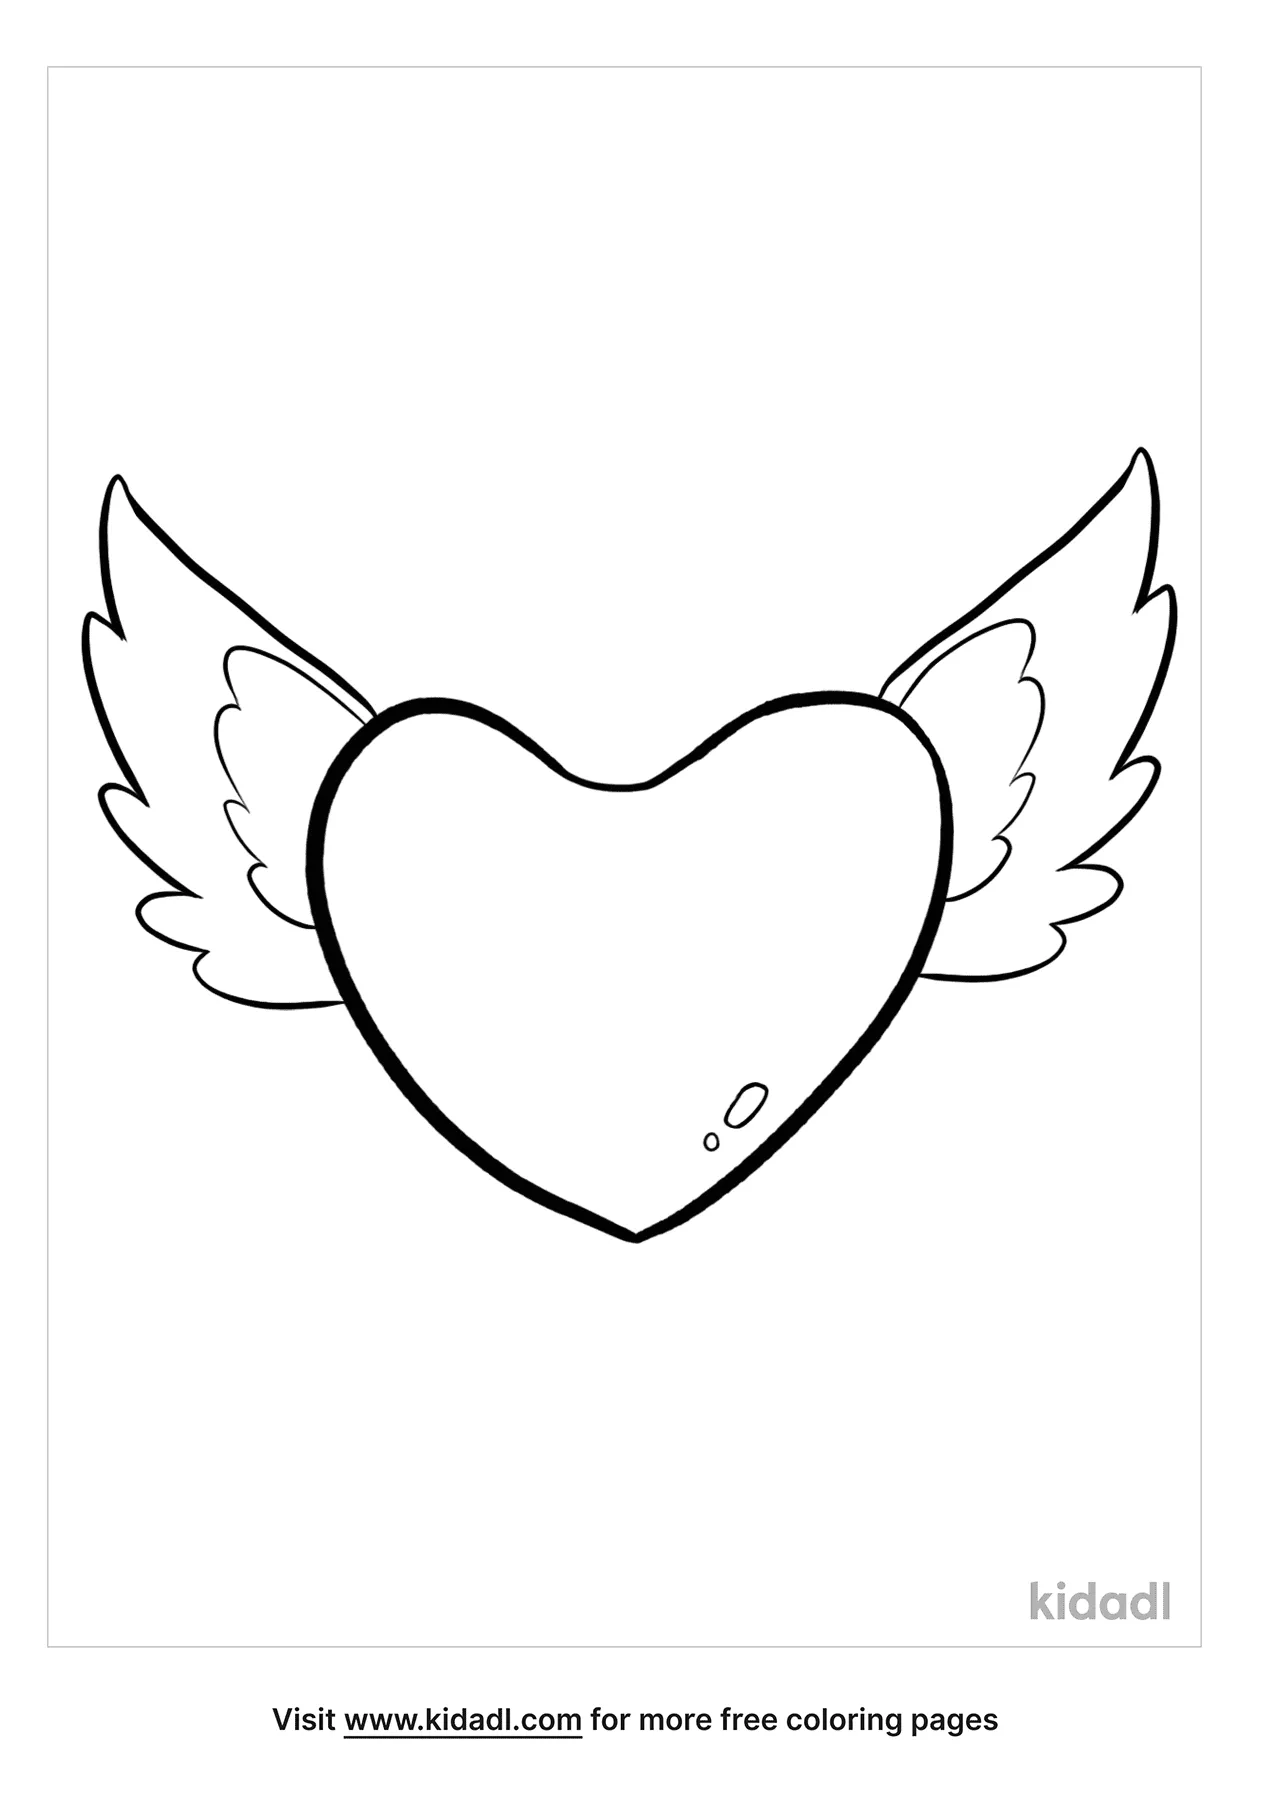 Free Heart With Wings Coloring Page | Coloring Page Printables | Kidadl